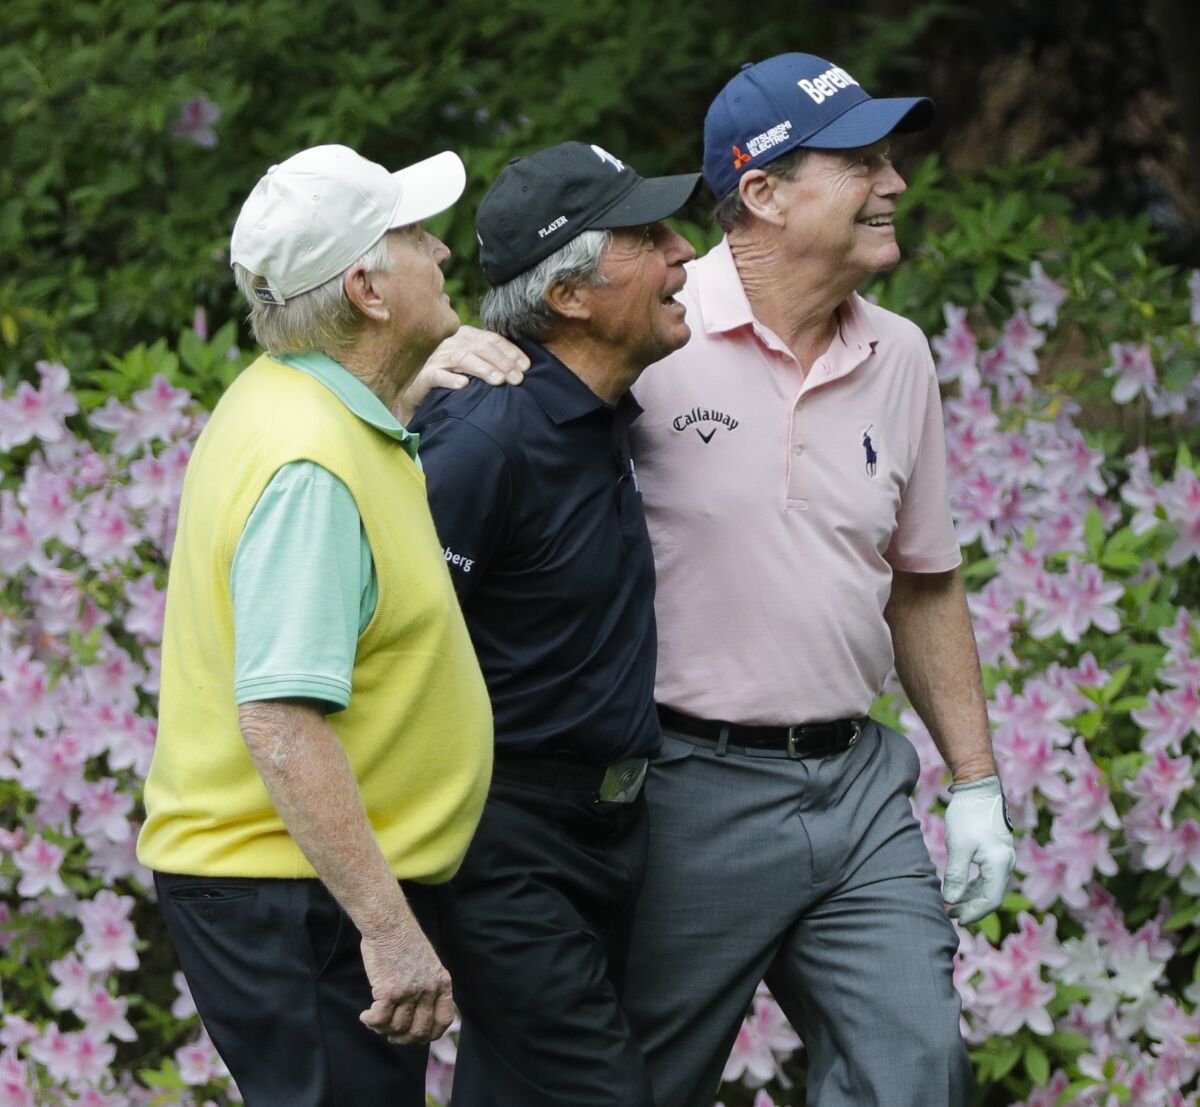 FILE - Jack Nicklaus, left, Gary Player, center, and Tom Watson play together during the par three competition at the Masters golf tournament Wednesday, April 4, 2018, in Augusta, Ga. The Masters said Tuesday, Jan. 11, 2022, that Watson will join them on the tee this year as an honorary starter. (AP Photo/David J. Phillip, File)